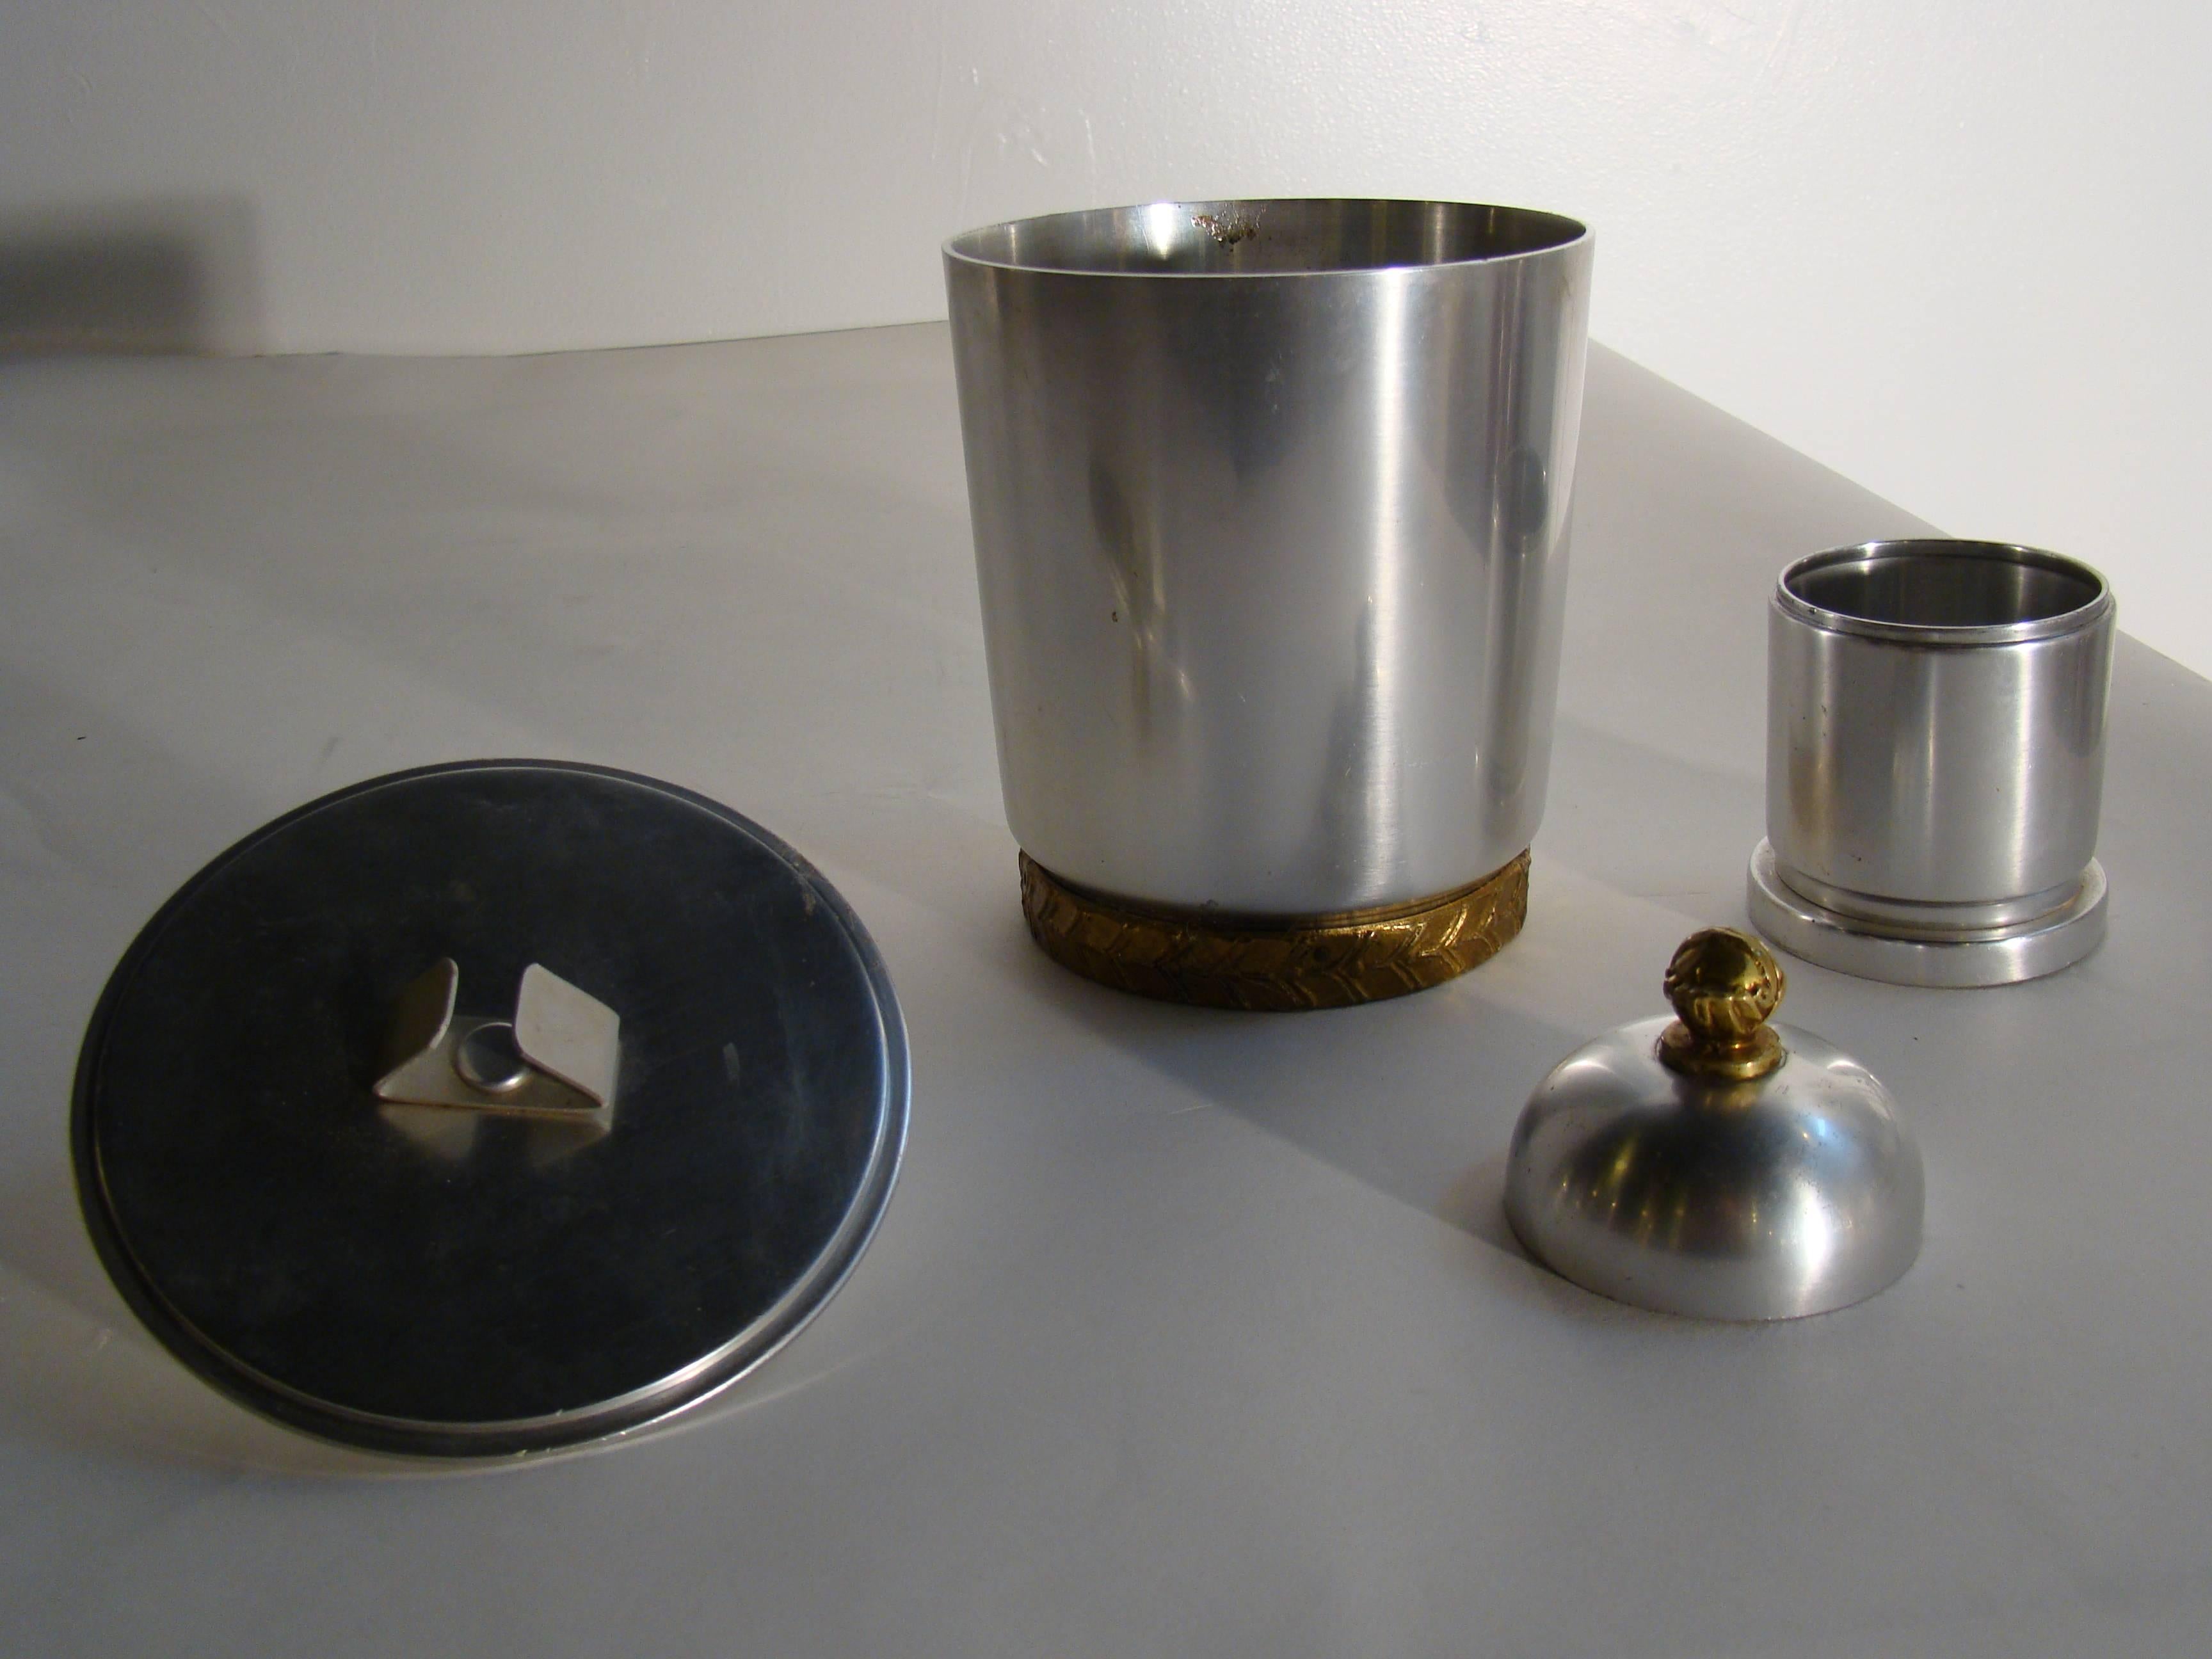 Famed industrial designer Lurelle Guild designed these pieces for the Kensington aluminum ware company in the 1930s.  The set consists of a cigar humidor trimmed in brass and complete with the sponge clip inside the top, and the cigarette holder